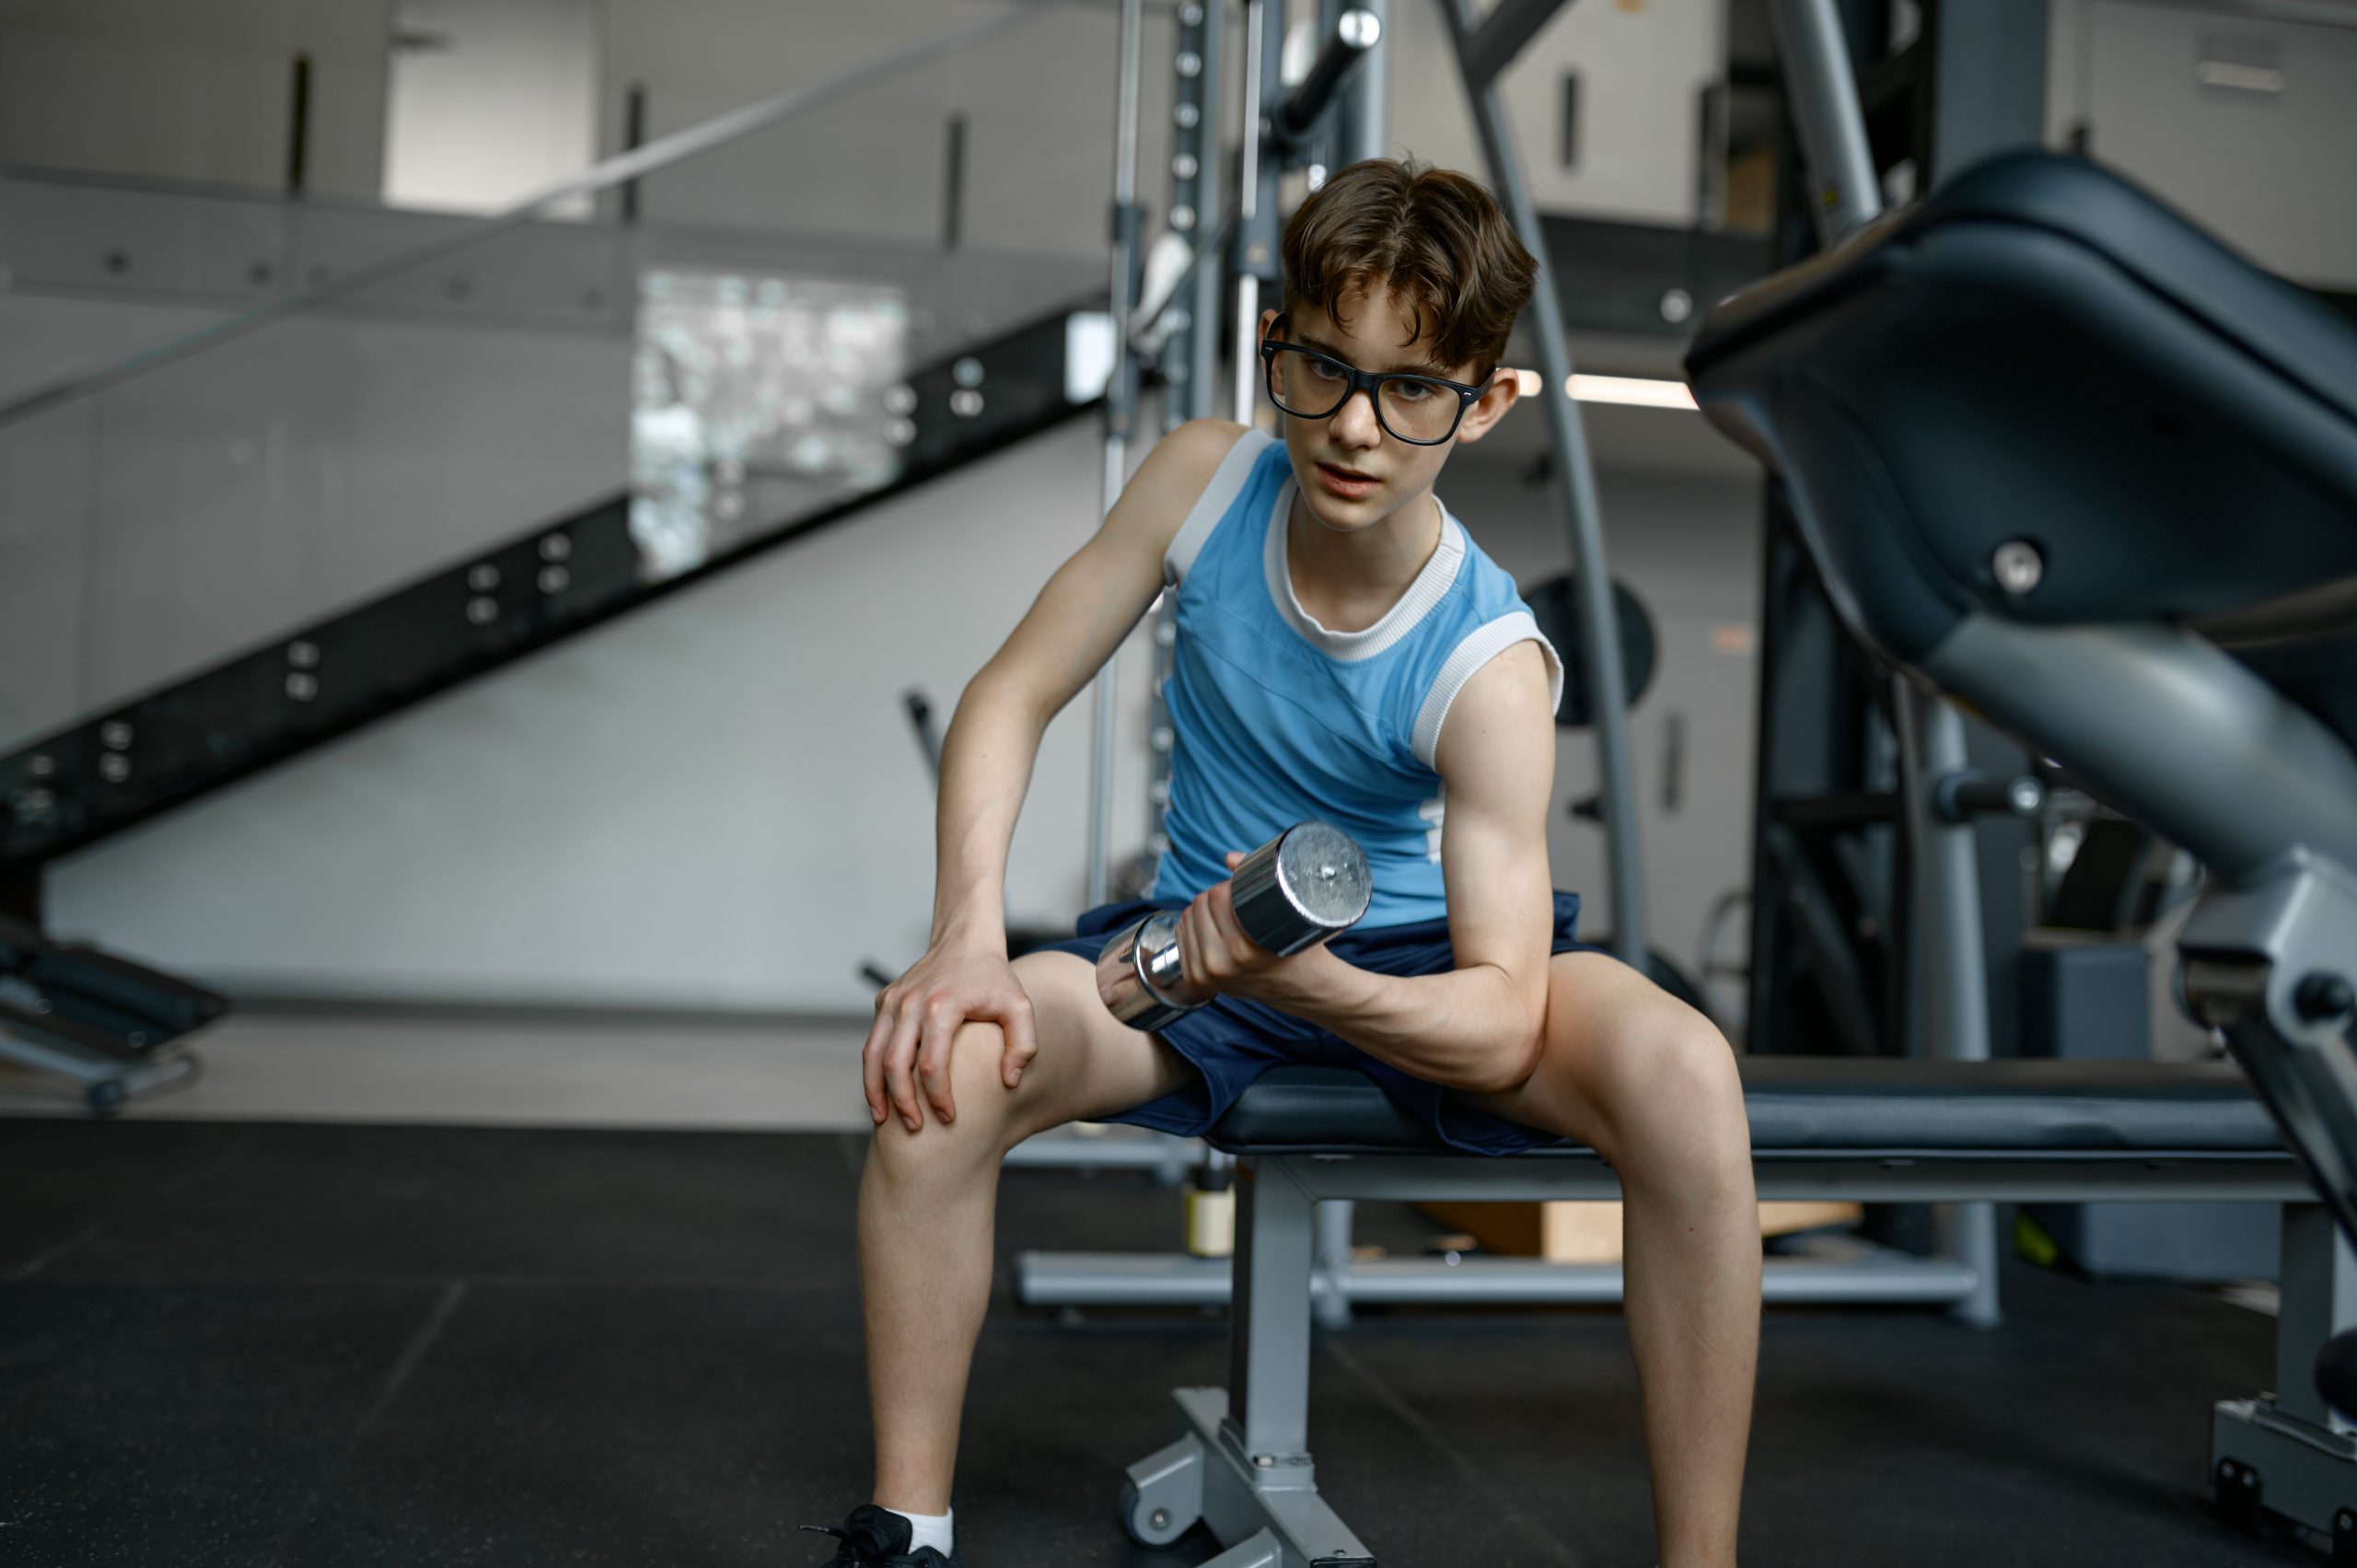 imageWhile compulsive exercise can be a common feature of anorexia regardless of gender, research demonstrates this symptom is often central to the presentation of the eating disorder for men